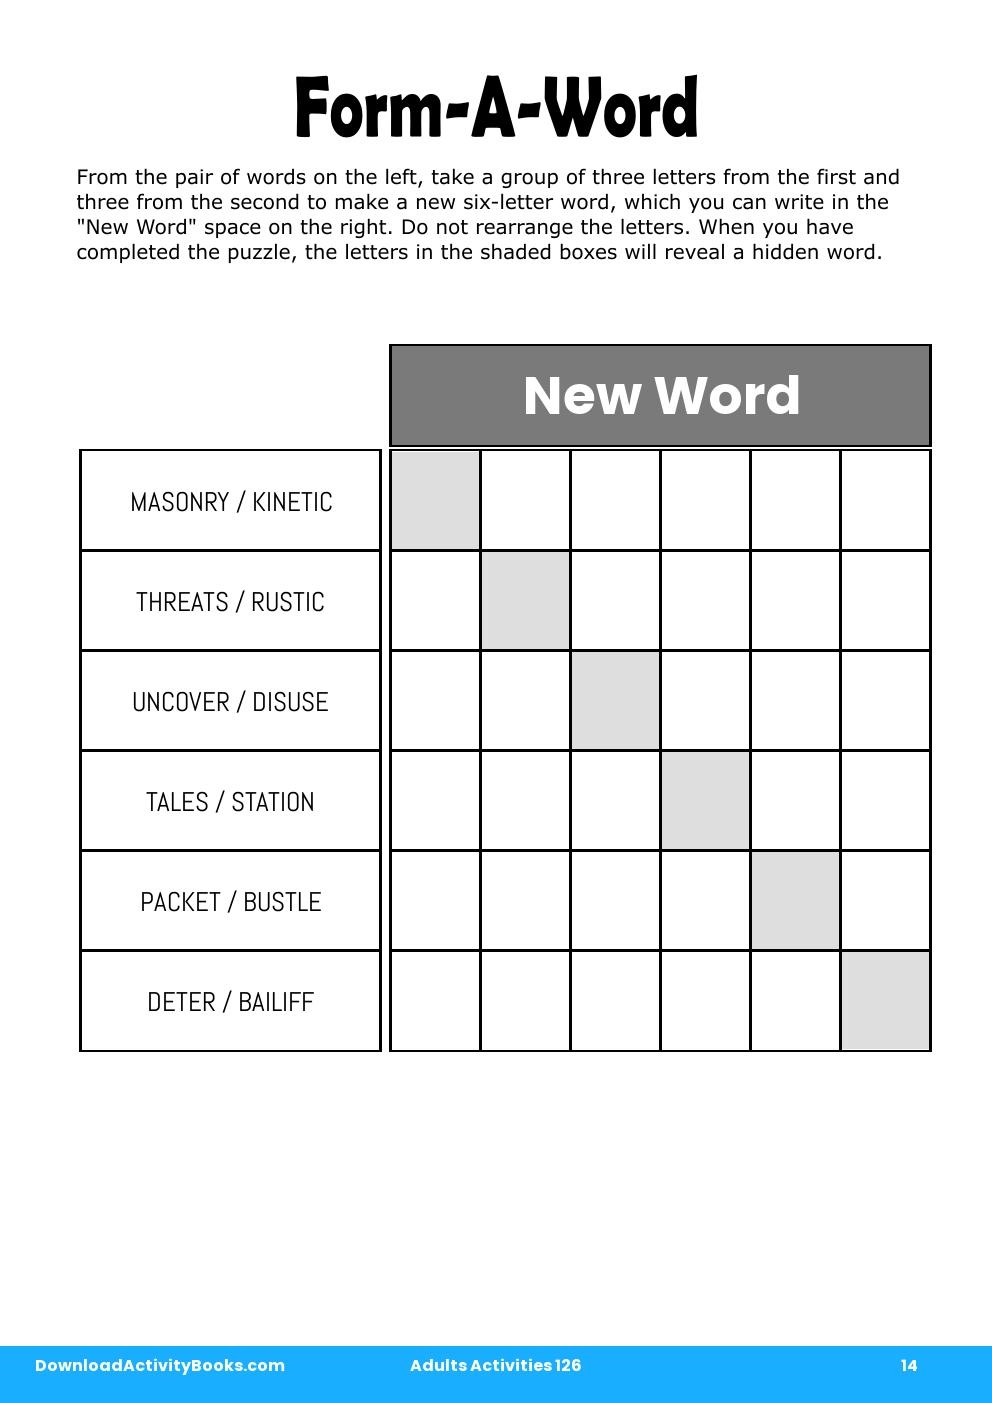 Form-A-Word in Adults Activities 126